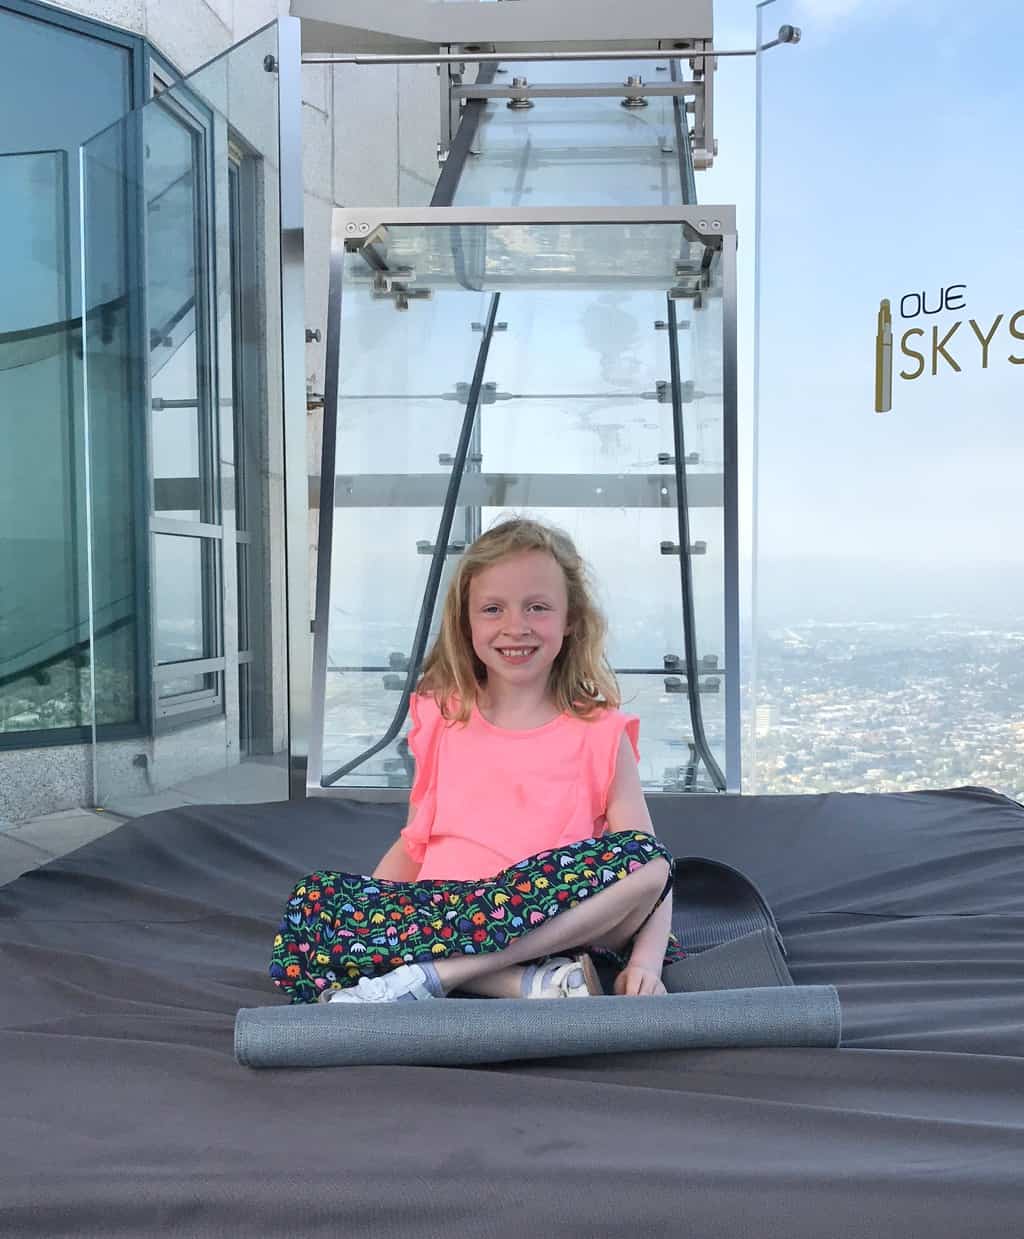 Are you an adventurous person looking for a fun time in Los Angeles?  If so, you should take a ride down the glass slide at Skyspace LA, the tallest open-air observation deck in California.  OUE Skyspace LA is a one-of-a-kind slide that goes along the outside of the iconic U.S. Bank Tower.  It's located approximately 73 stories tall and 1,000 feet above the ground.